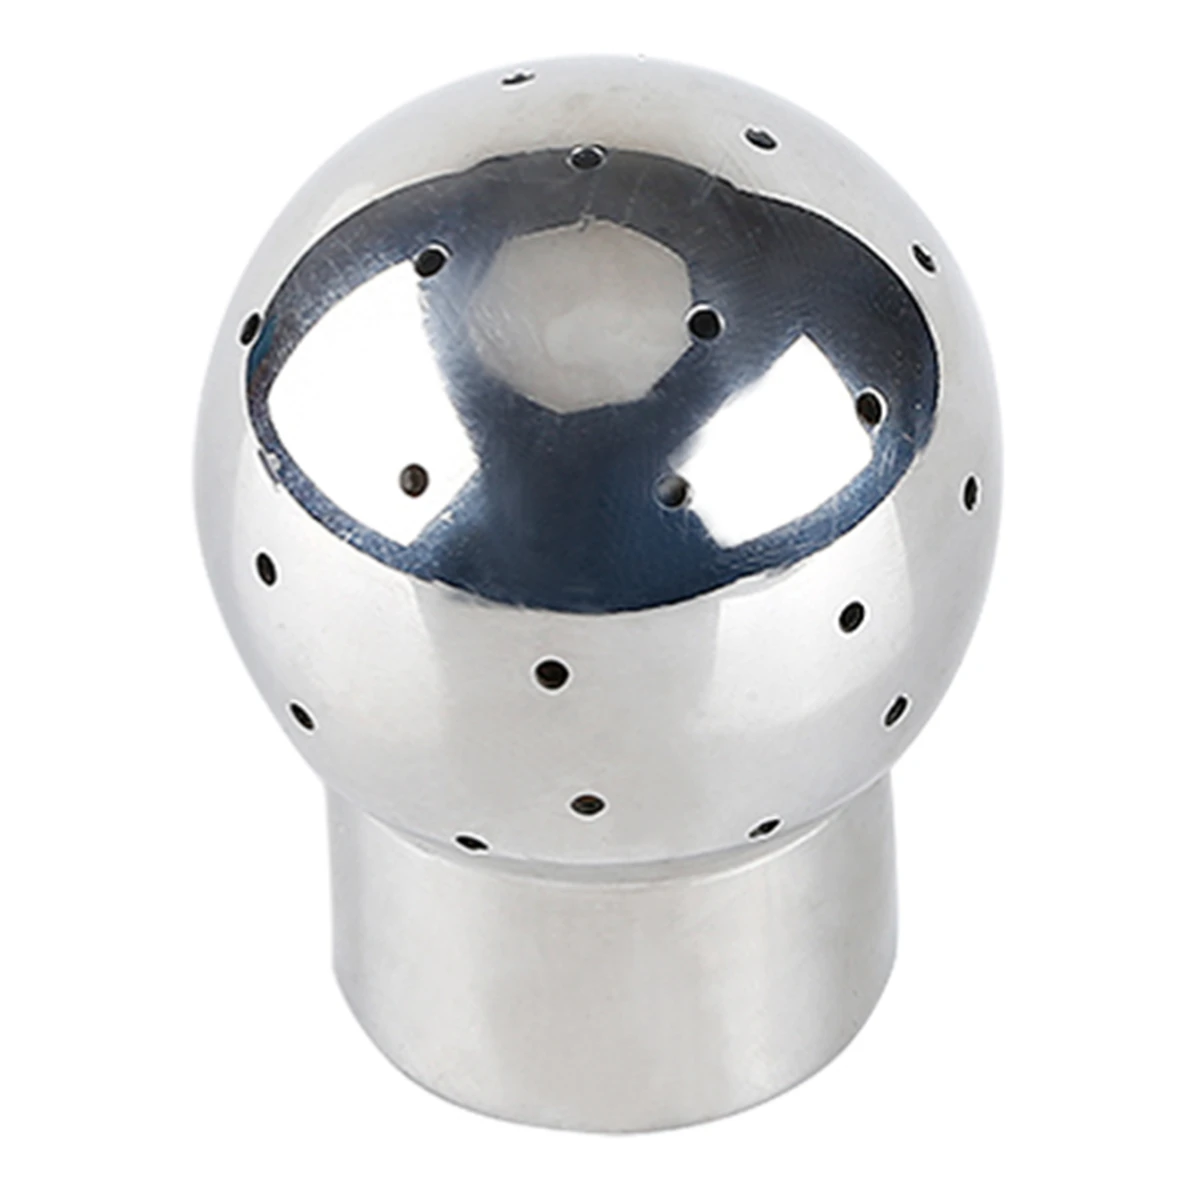 

DN25 1" BSP Stainless Steel 316 Female Thread Fixed Tank Cleaning Head Sanitary Rotary Spray Ball